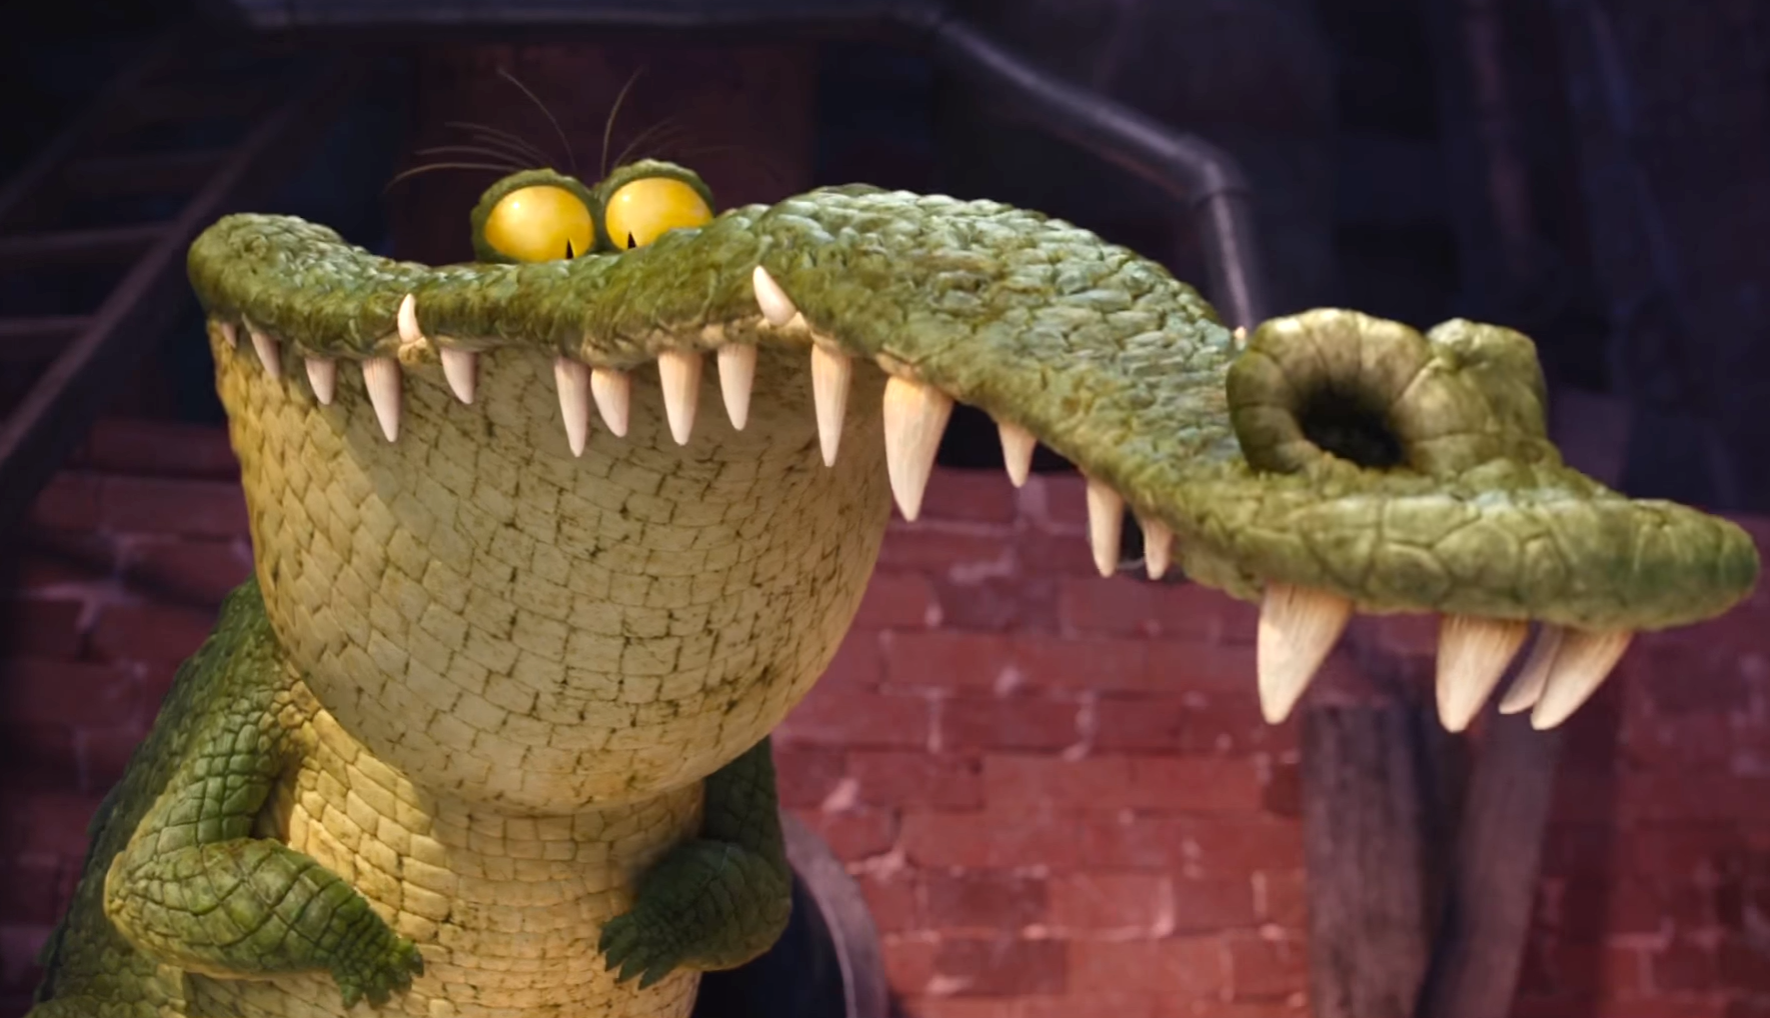 Derick is a large crocodile and minor character in The Secret Life of Pets....